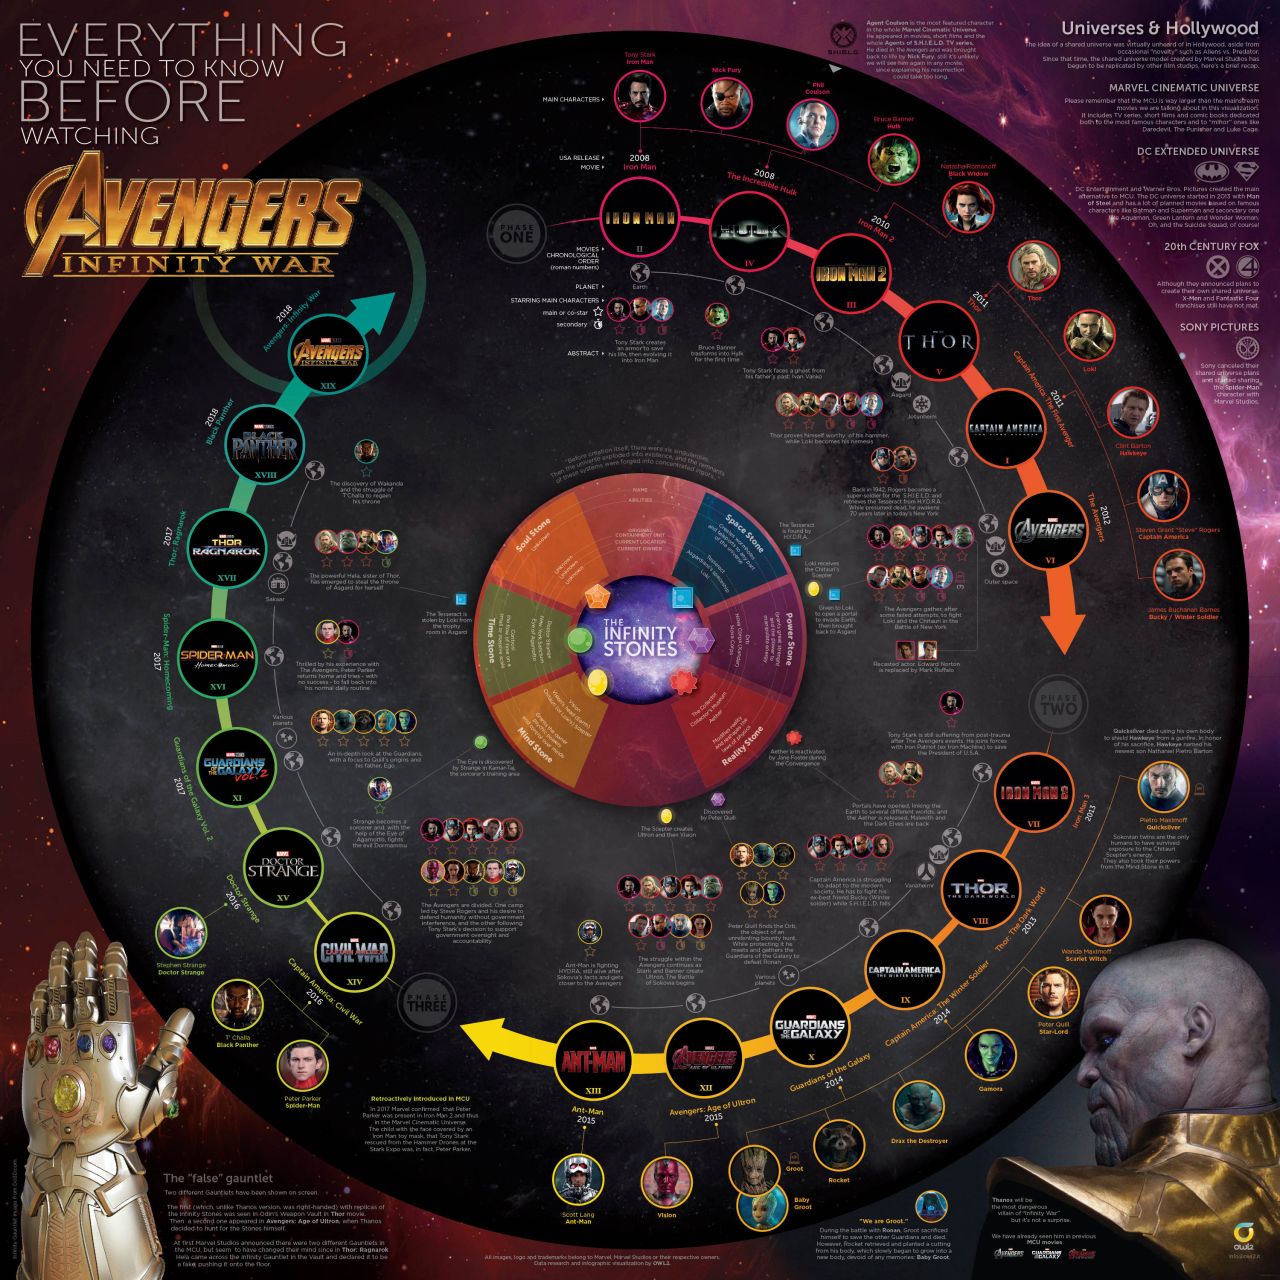 Everything You Need To Know Before Seeing Avengers: Infinity War [Infographic]